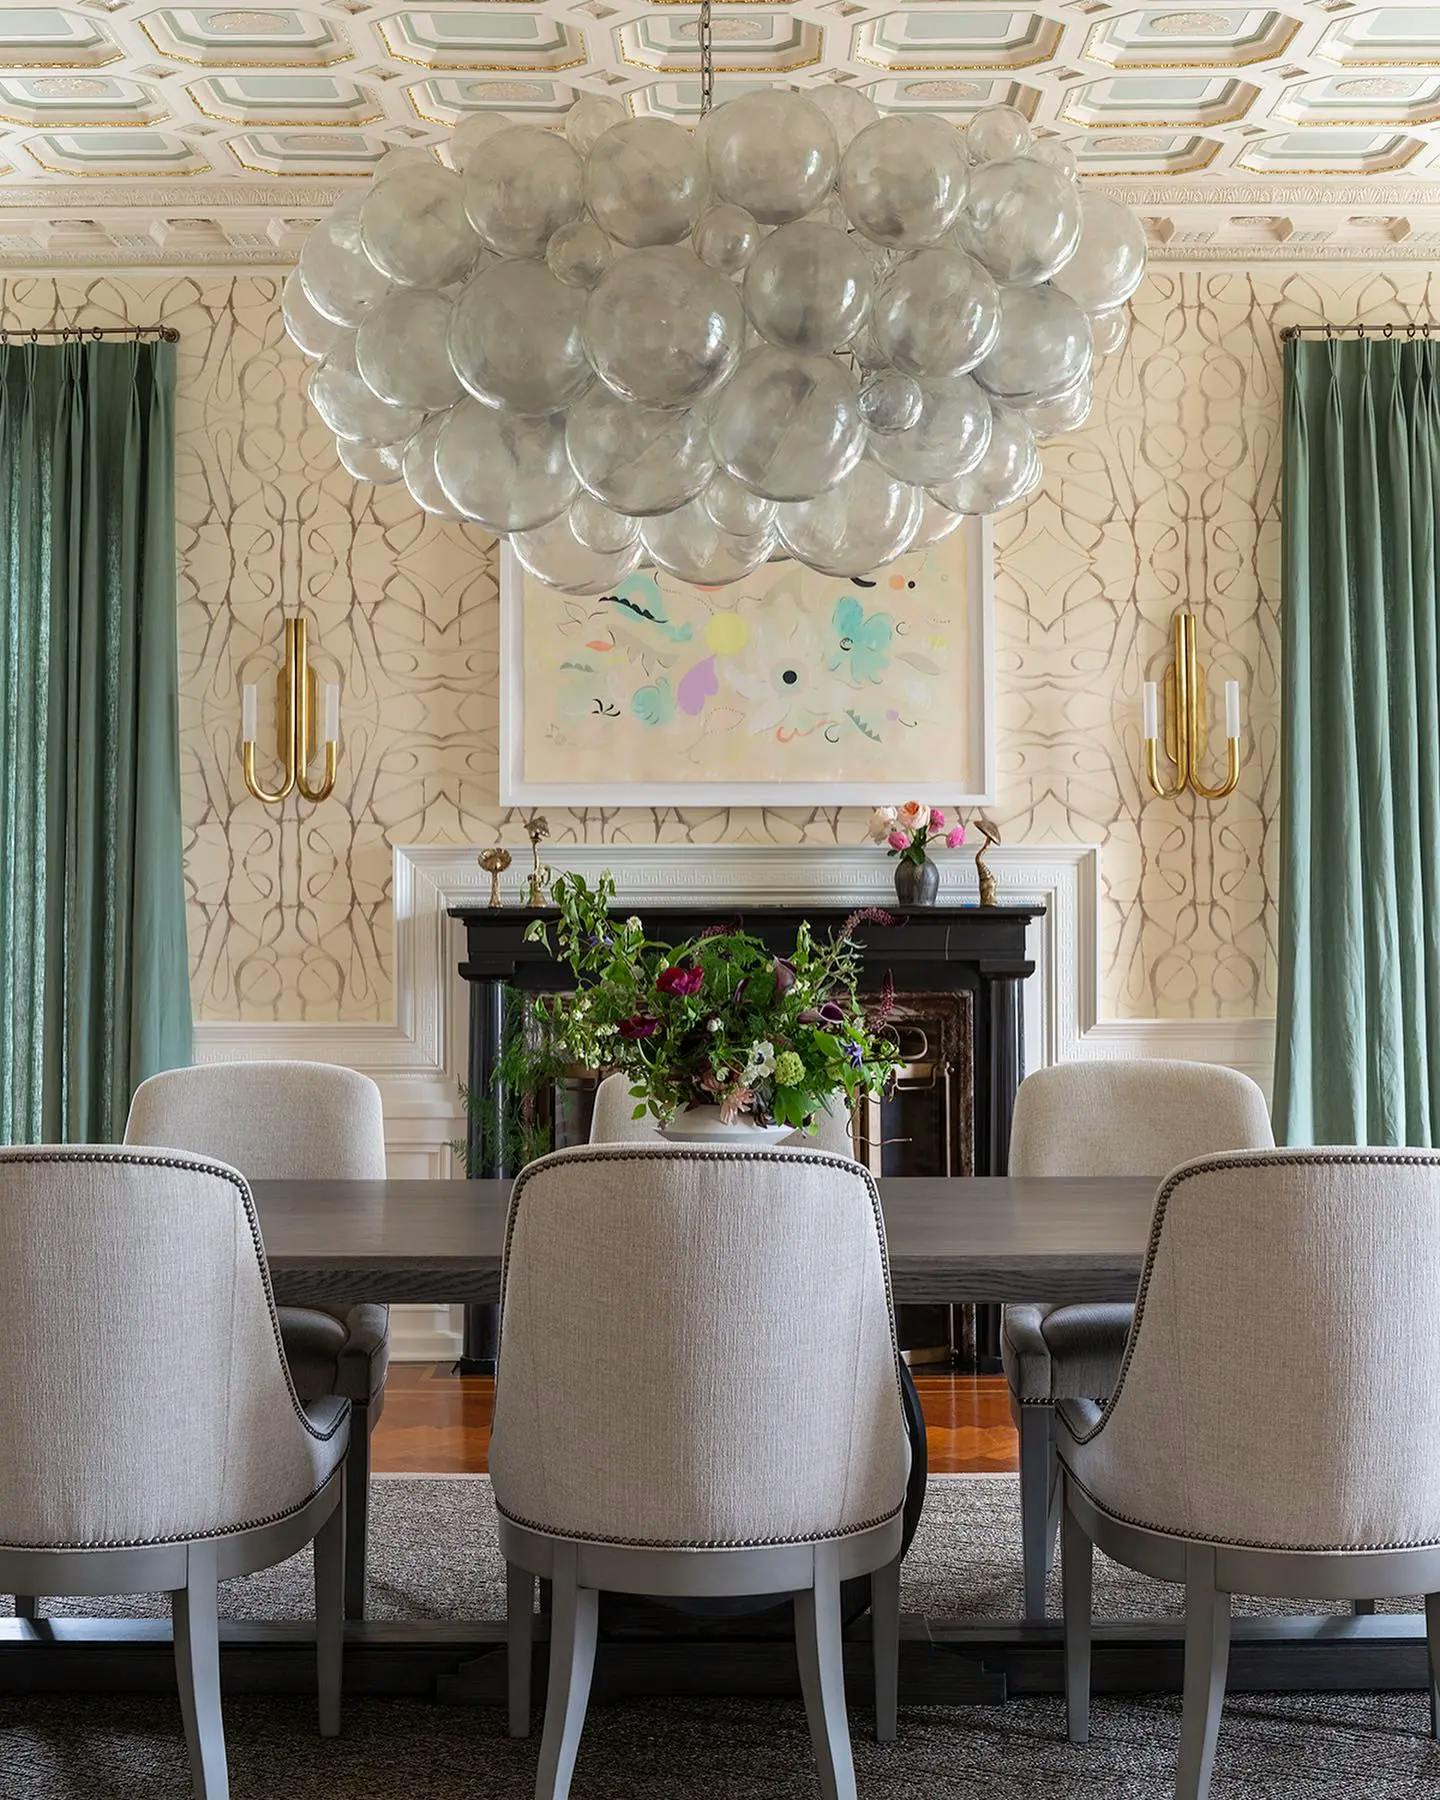 A floral painting by artist Kayla Plosz Antiel installed above a fireplace in a dining room.